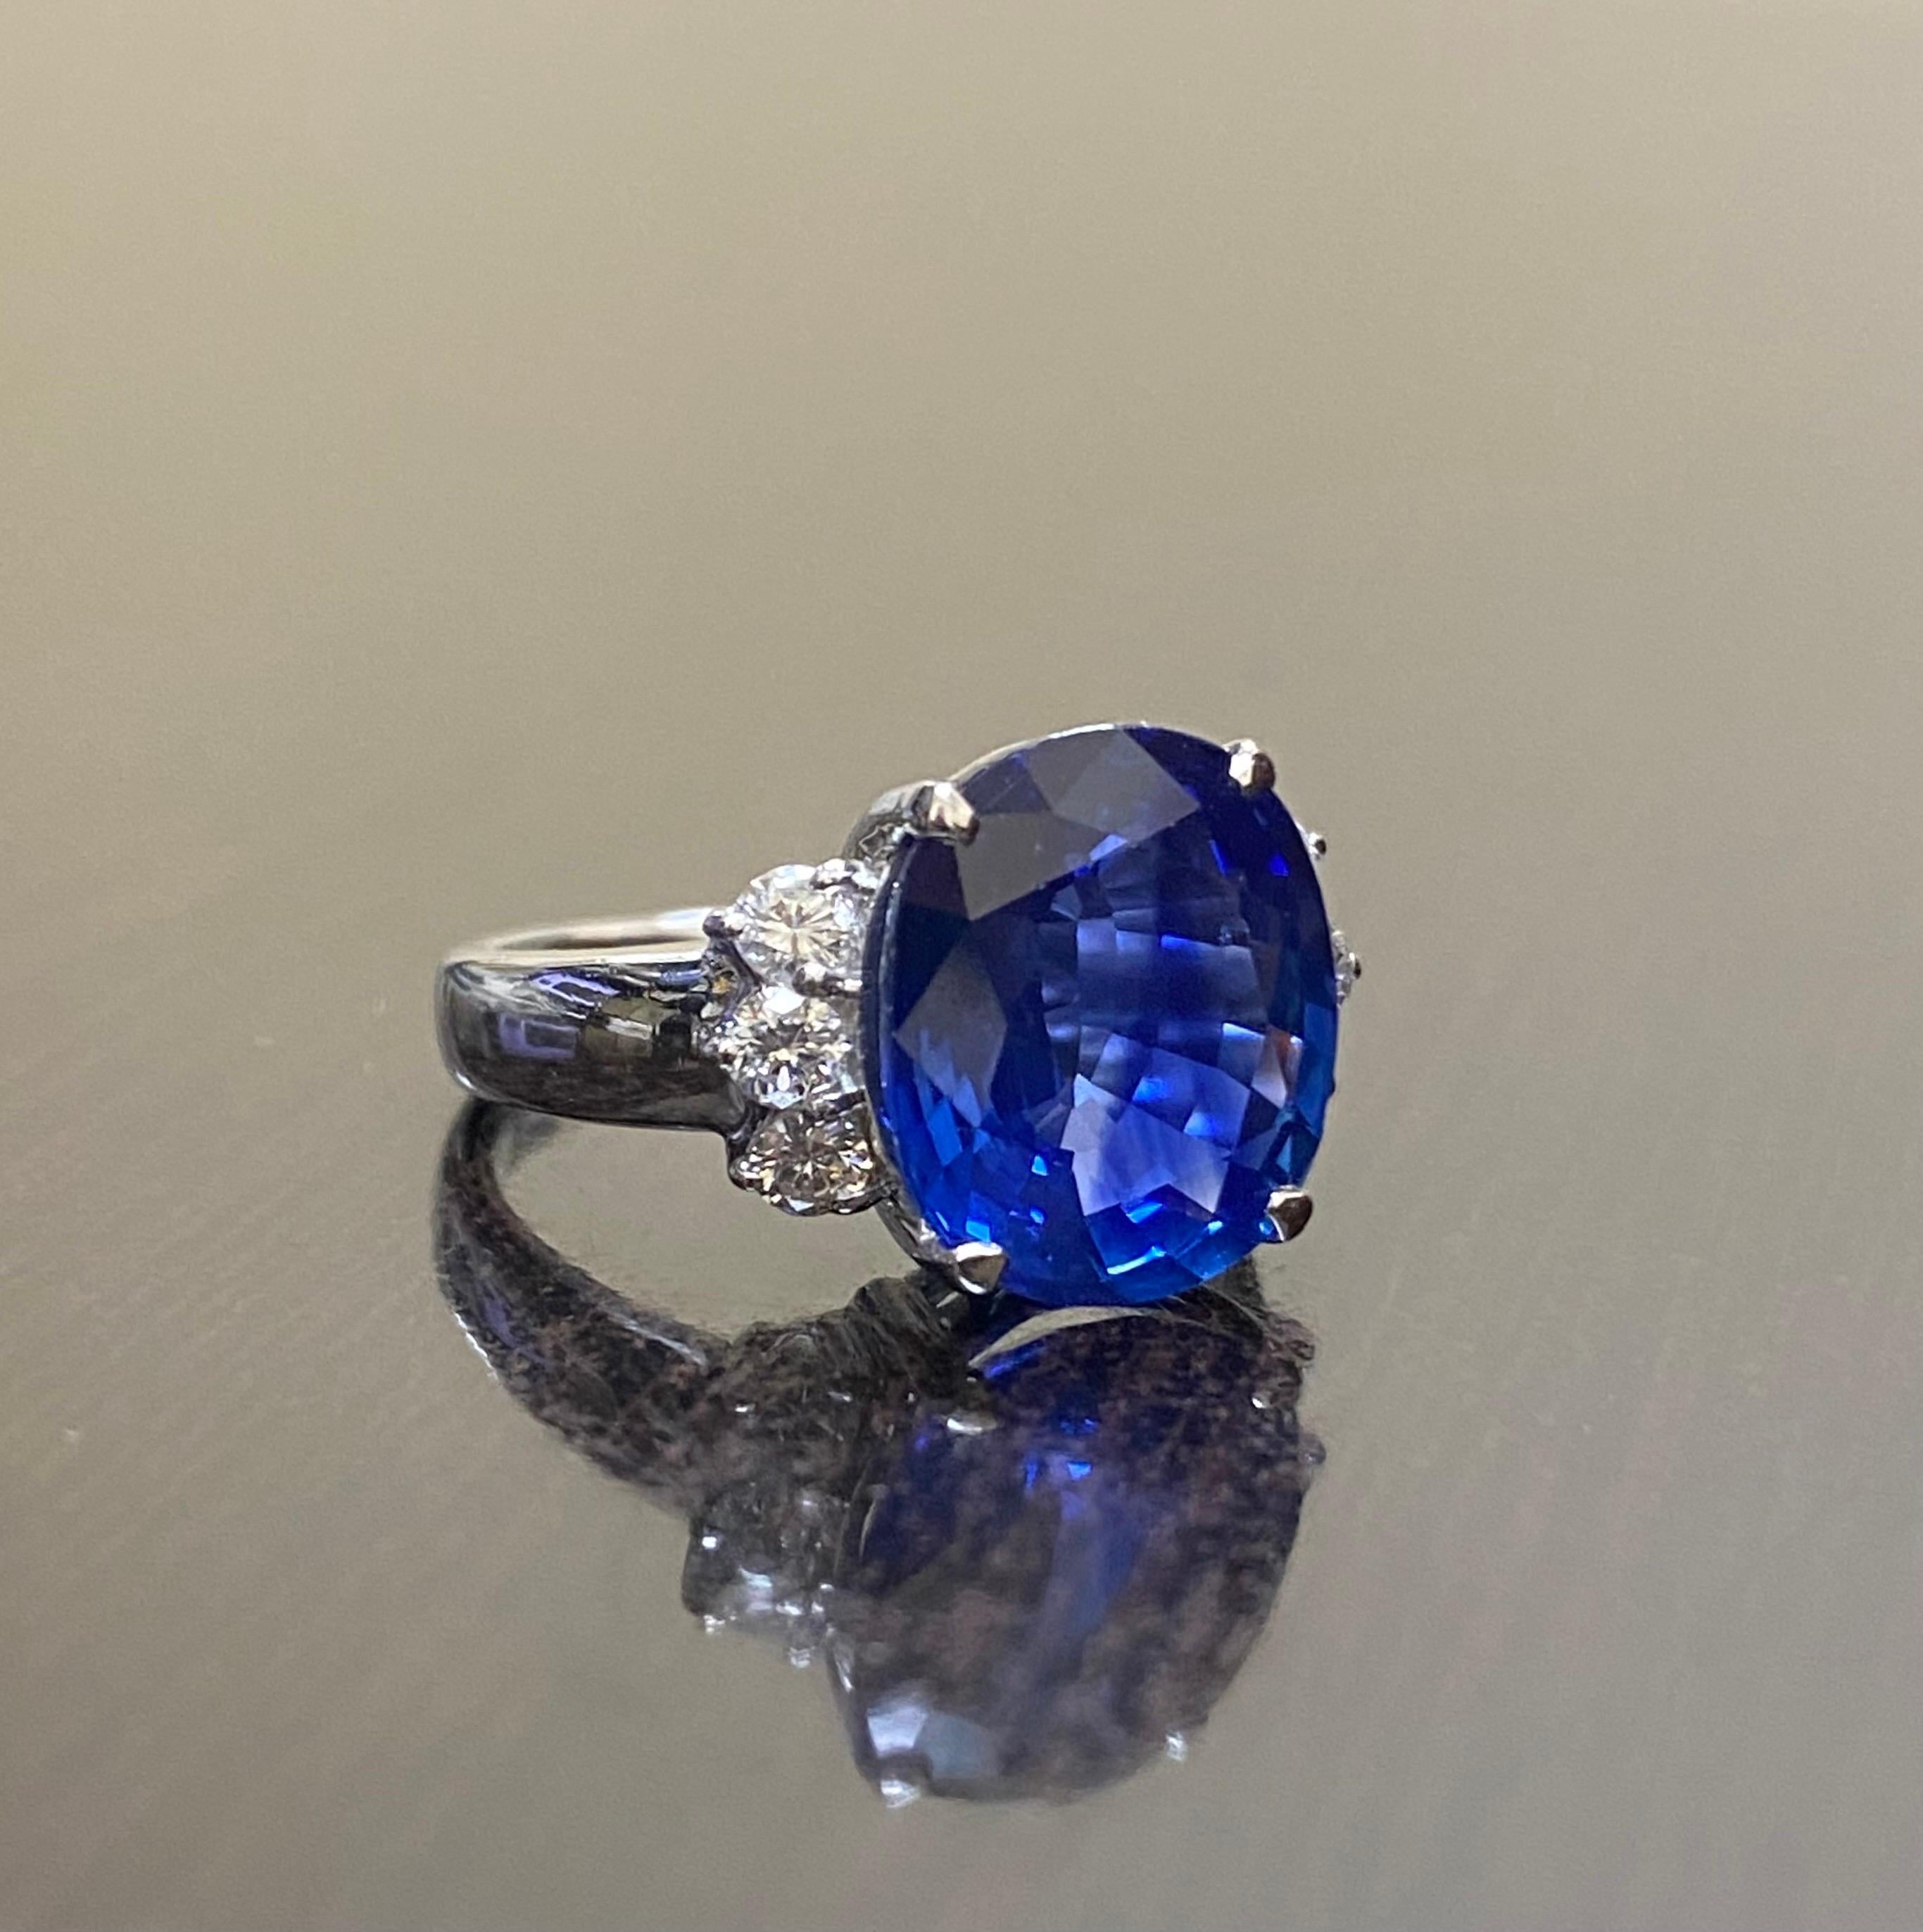 Handmade Platinum Diamond GIA Certified 7.03 Oval Blue Sapphire Engagement Ring In New Condition For Sale In Los Angeles, CA